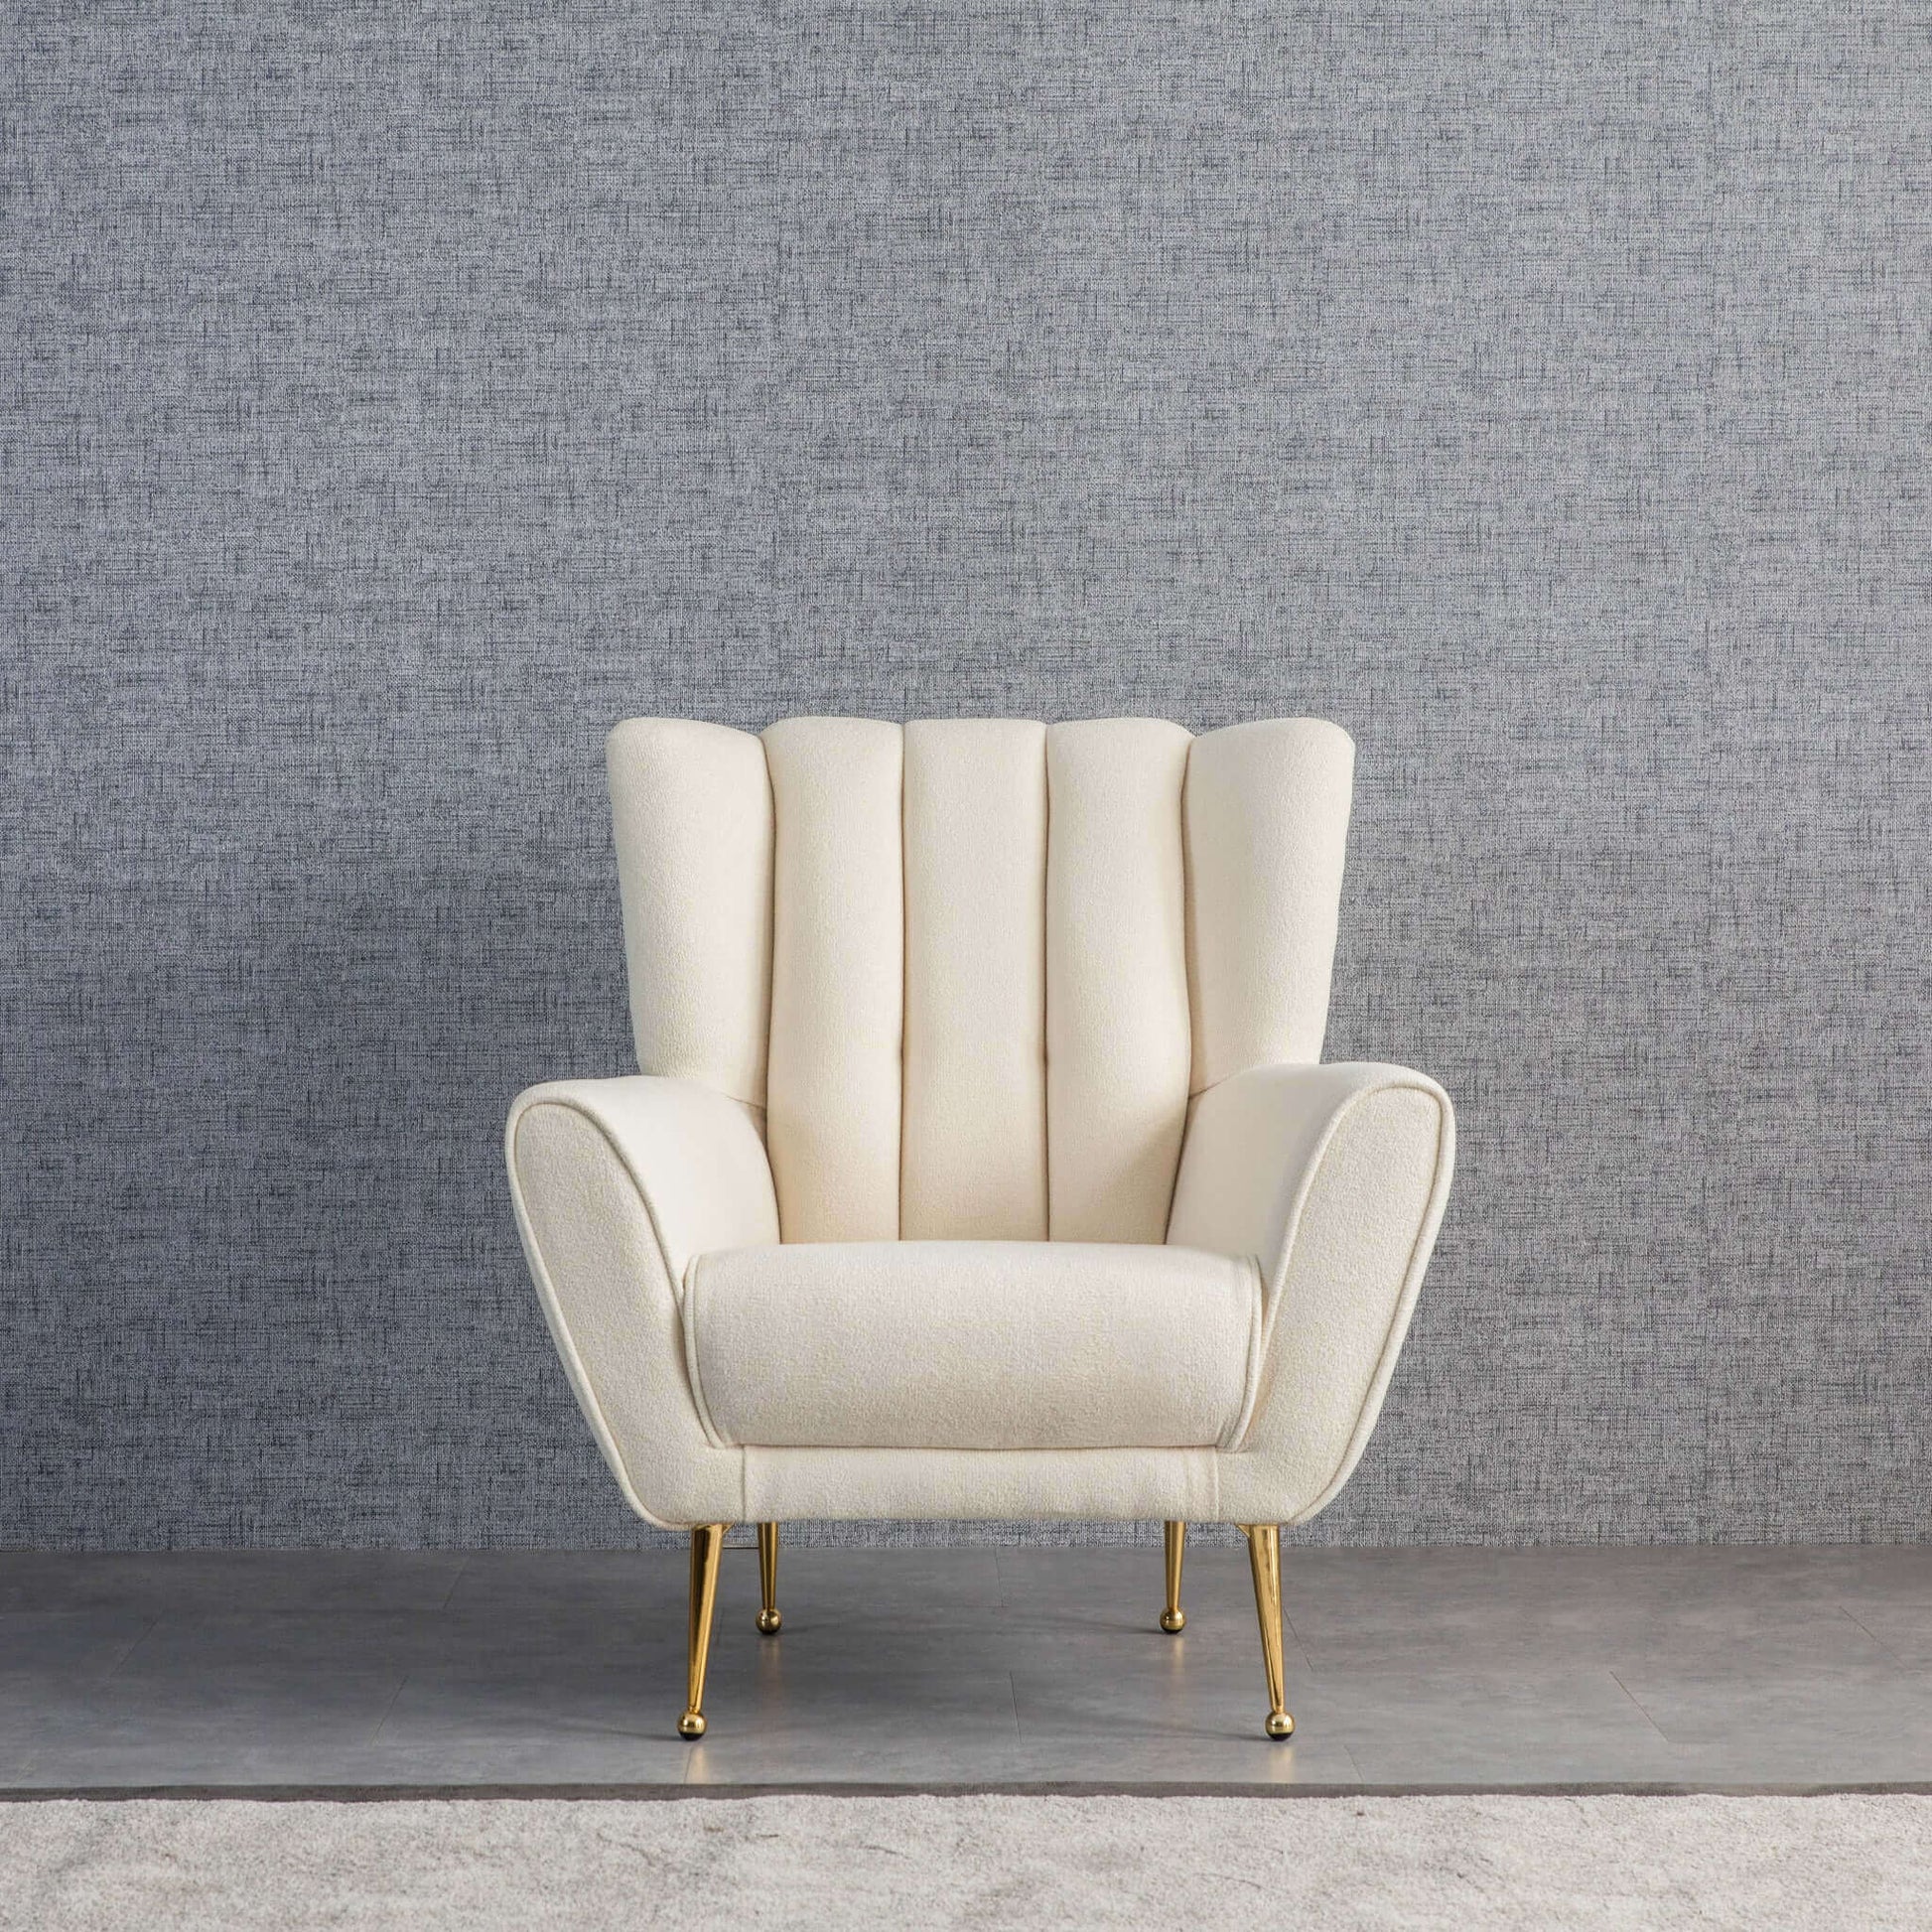 Ashcroft Furniture Co Lounge Chairs Gianna Mid-Century Modern Tufted French Boucle Armchair